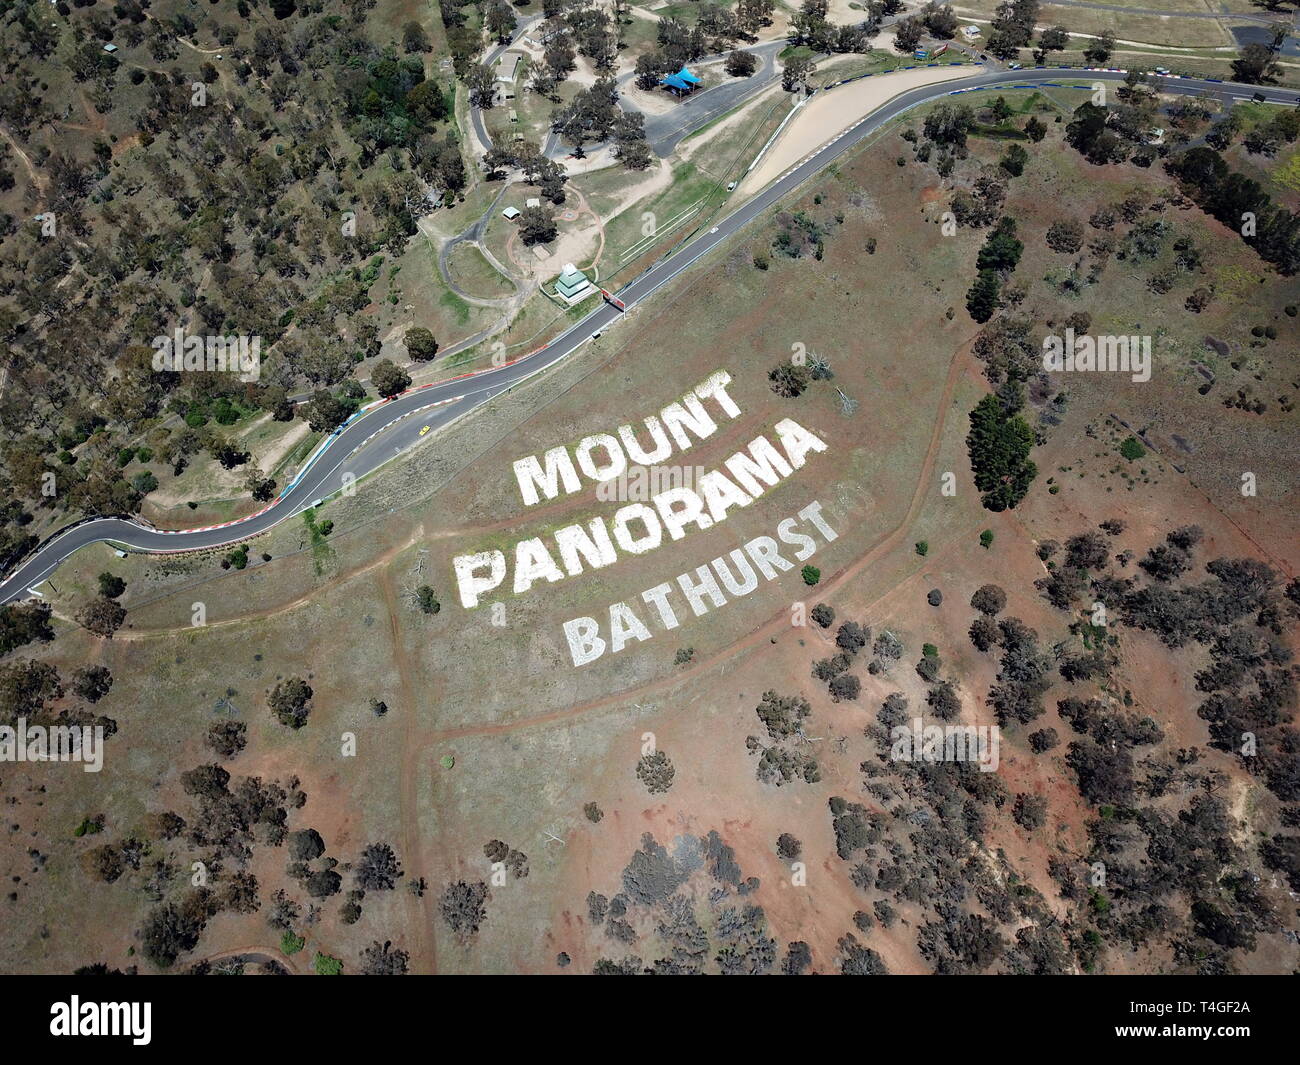 Aerial view of the Mount Panorama Circuit, the home of Australia most famous motor car race. Bathurst is located in the central west region of NSW. Stock Photo